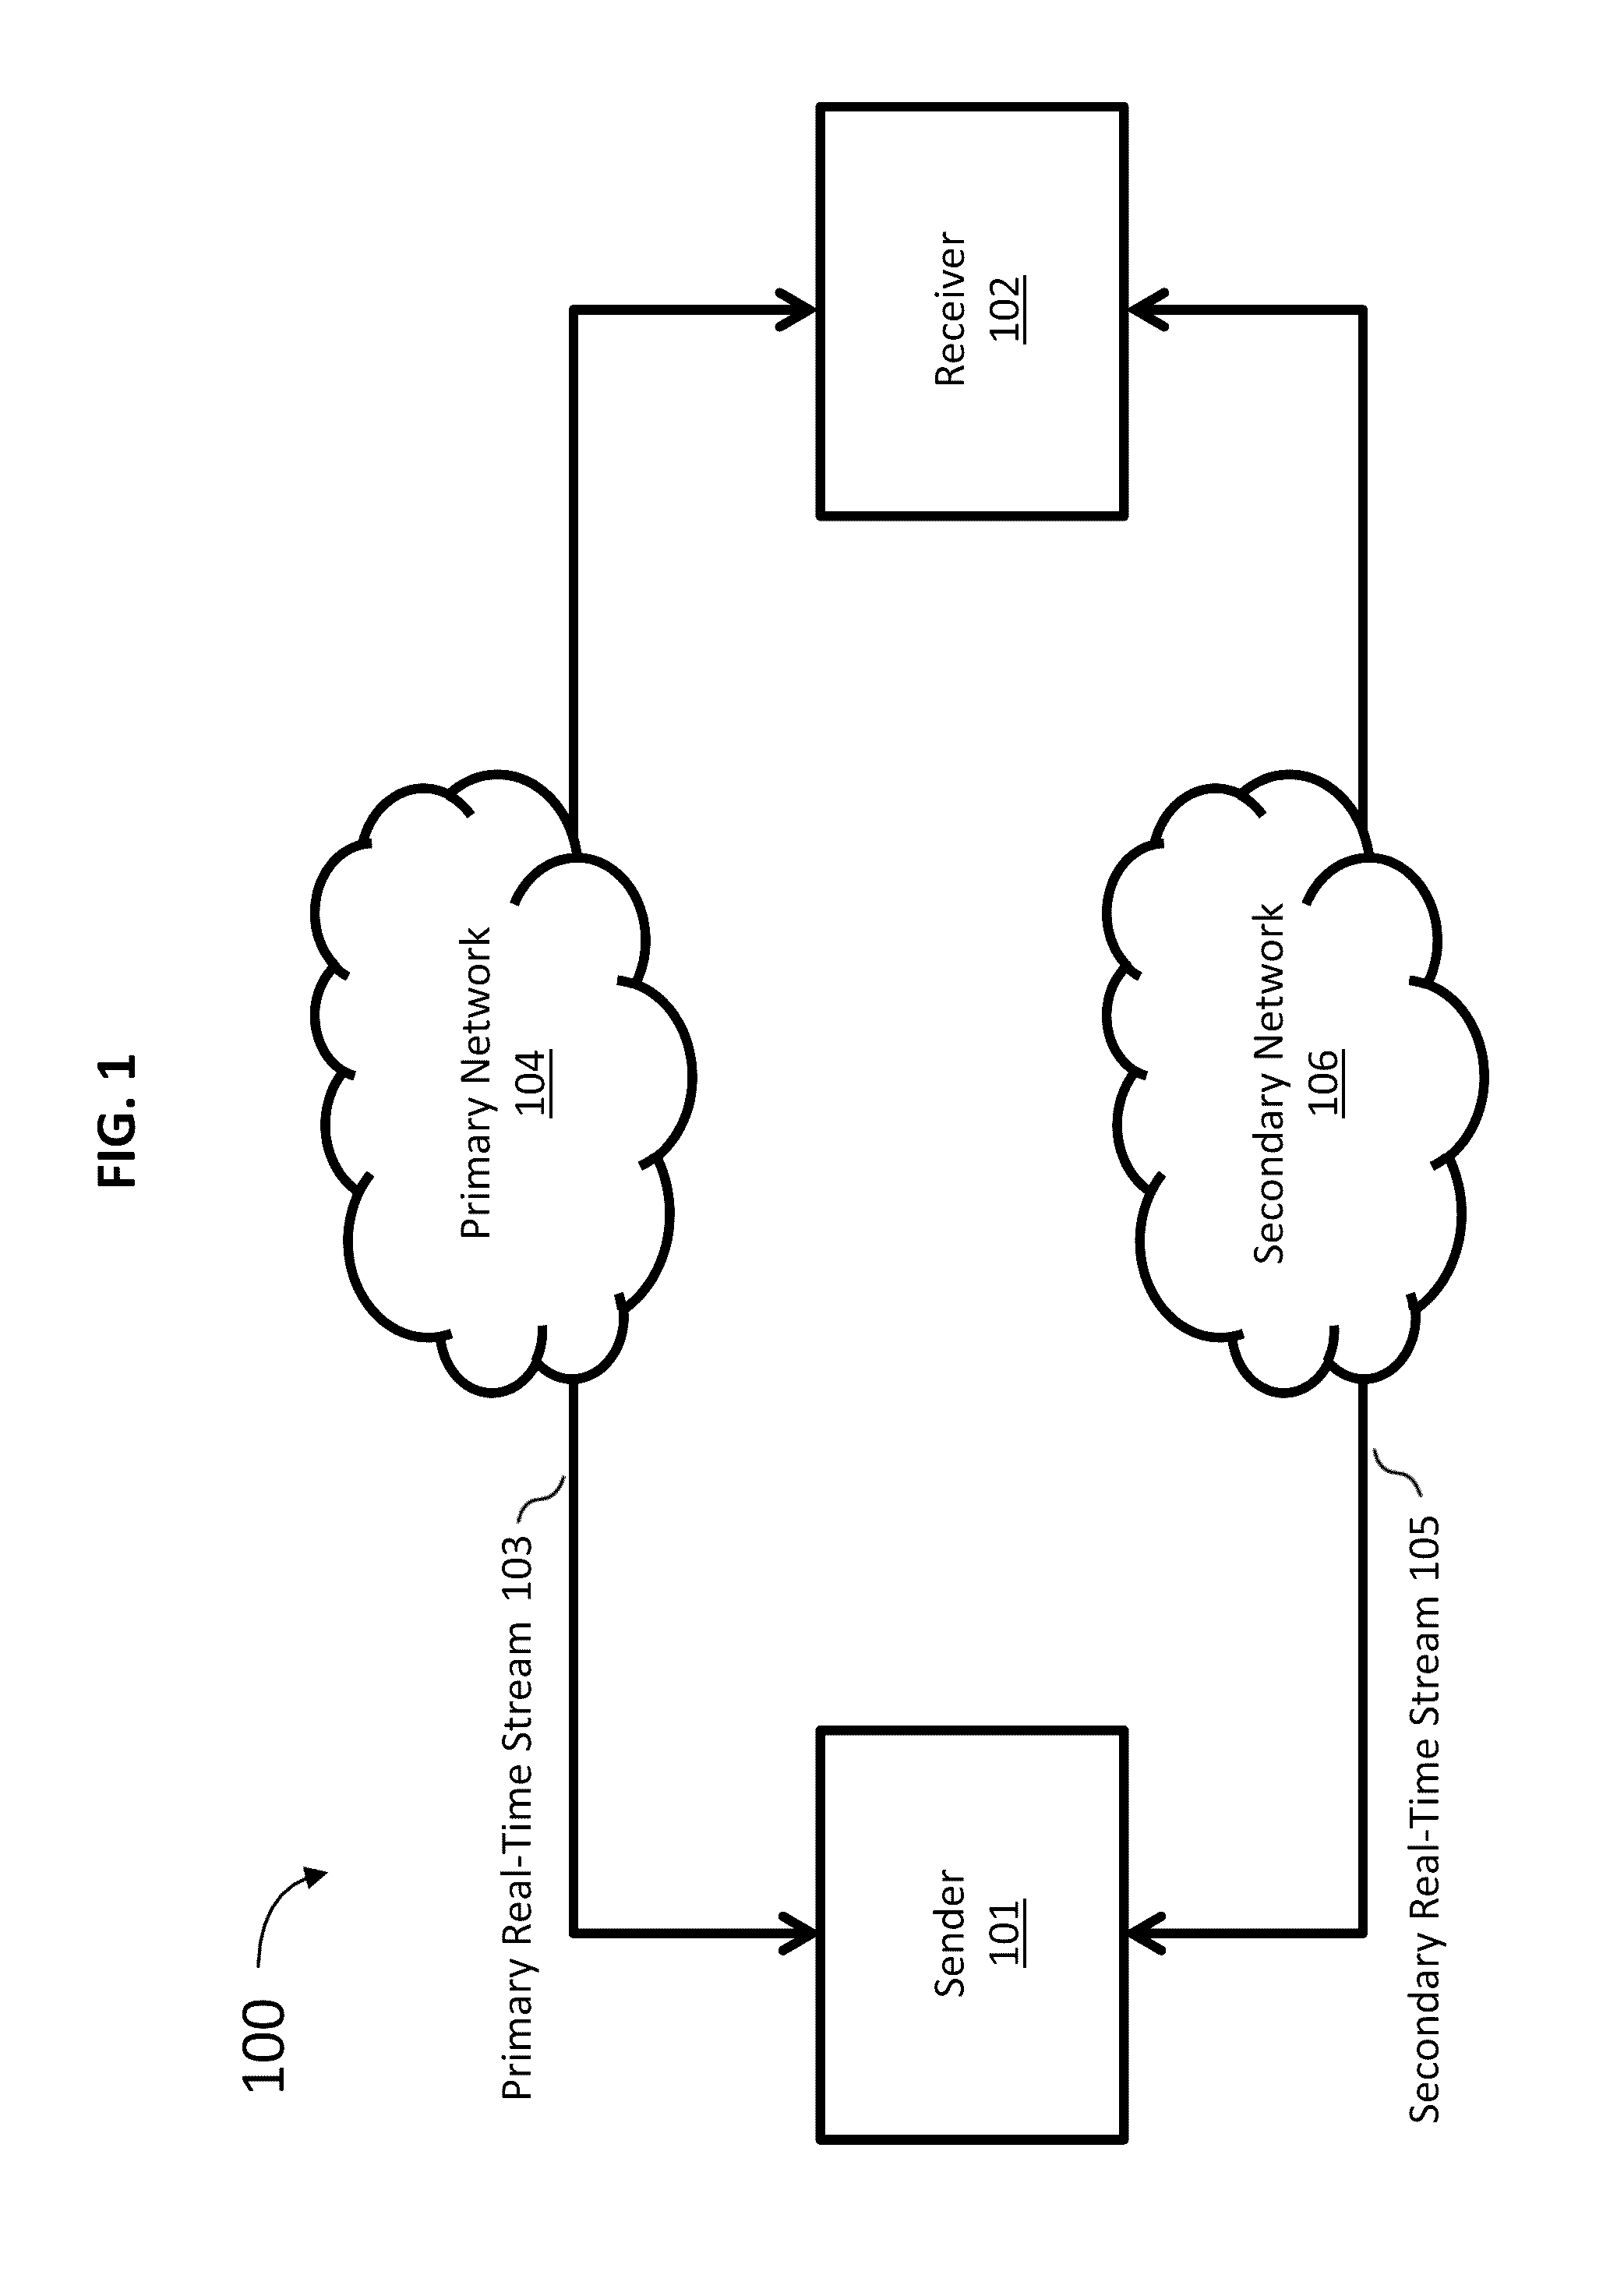 Managing alternative networks for high quality of service communications